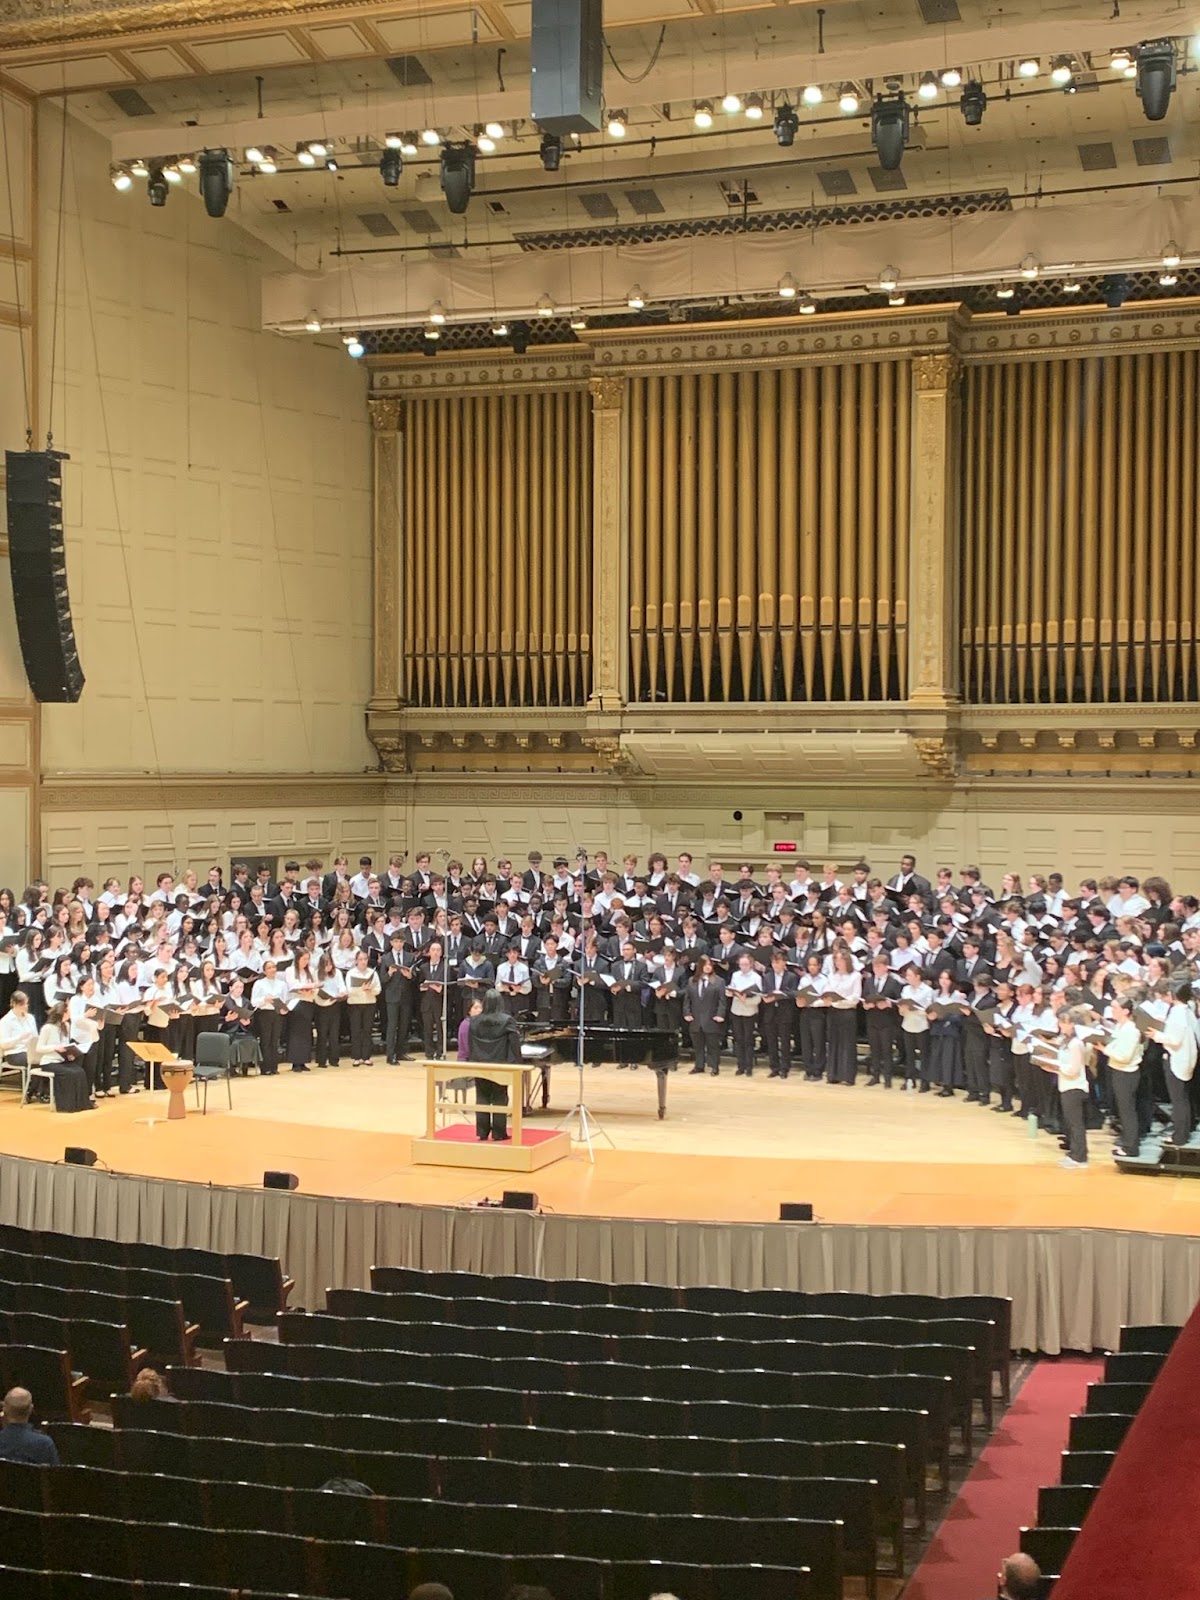 image of the stage and musicians at the all state music festival